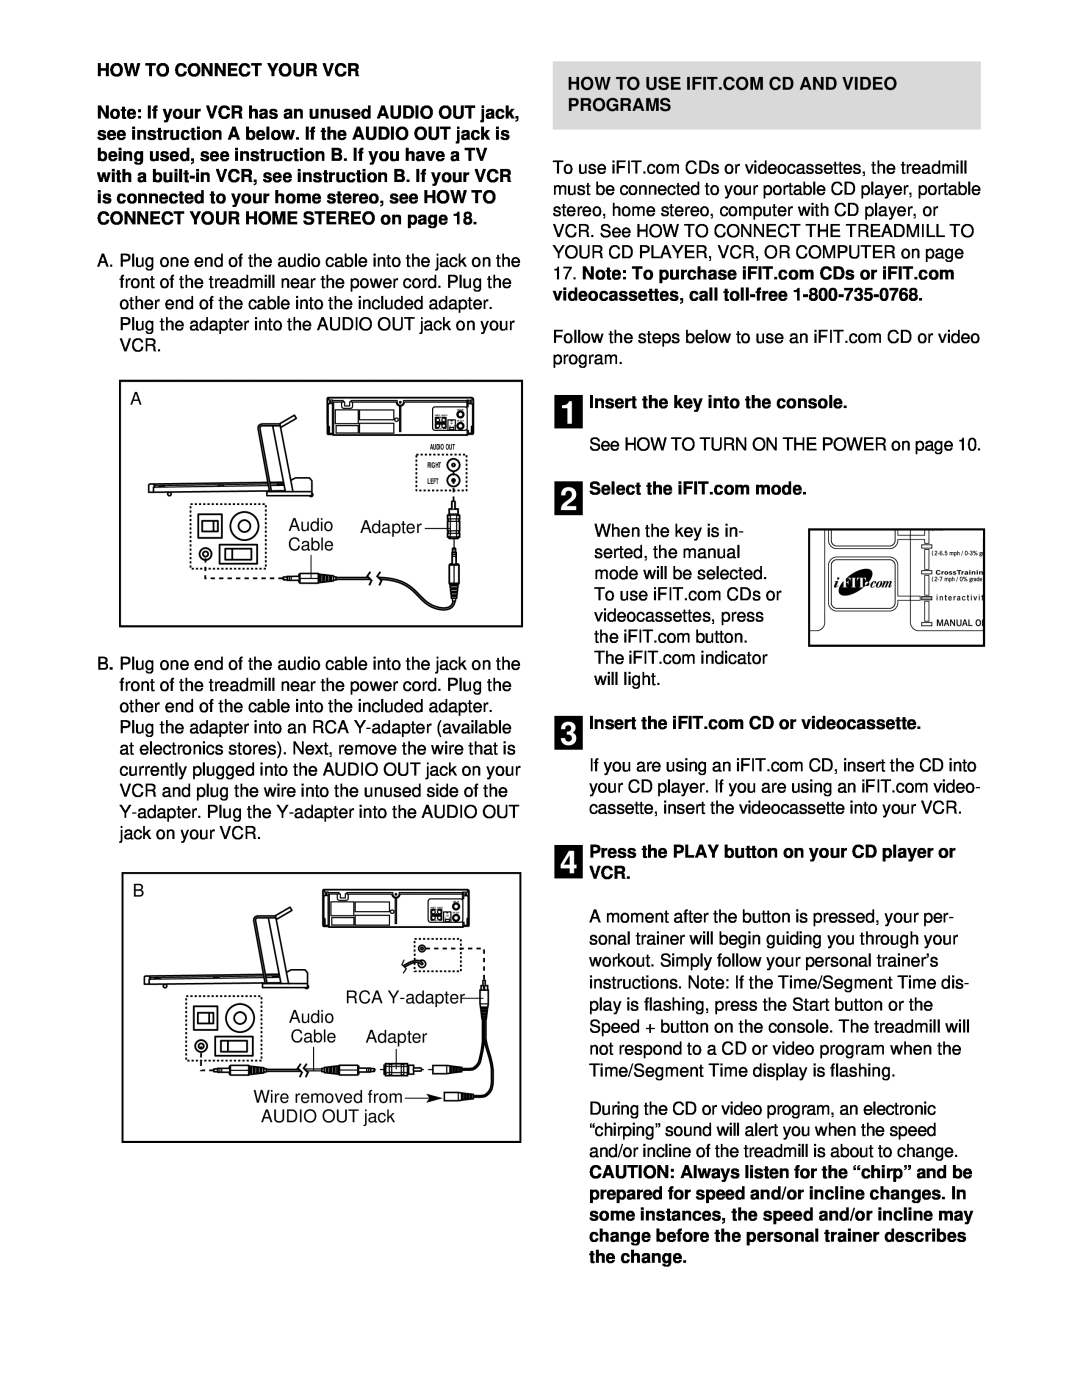 Healthrider HRTL14910 manual How To Connect Your Vcr, Audio, Adapter, Cable, Insert the key into the console 